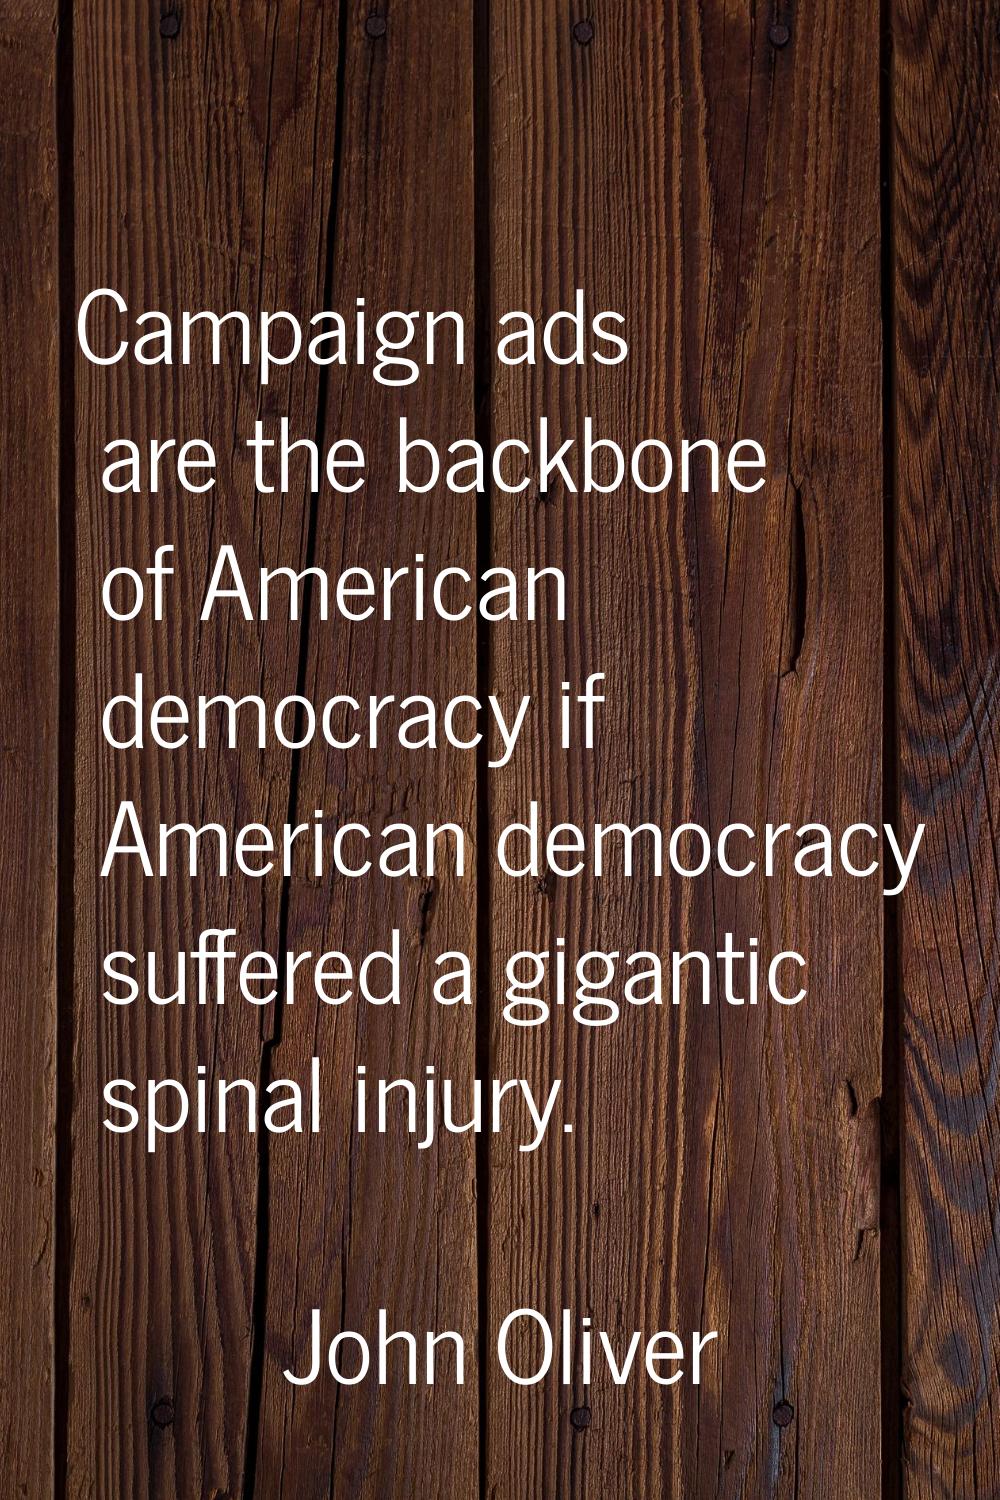 Campaign ads are the backbone of American democracy if American democracy suffered a gigantic spina